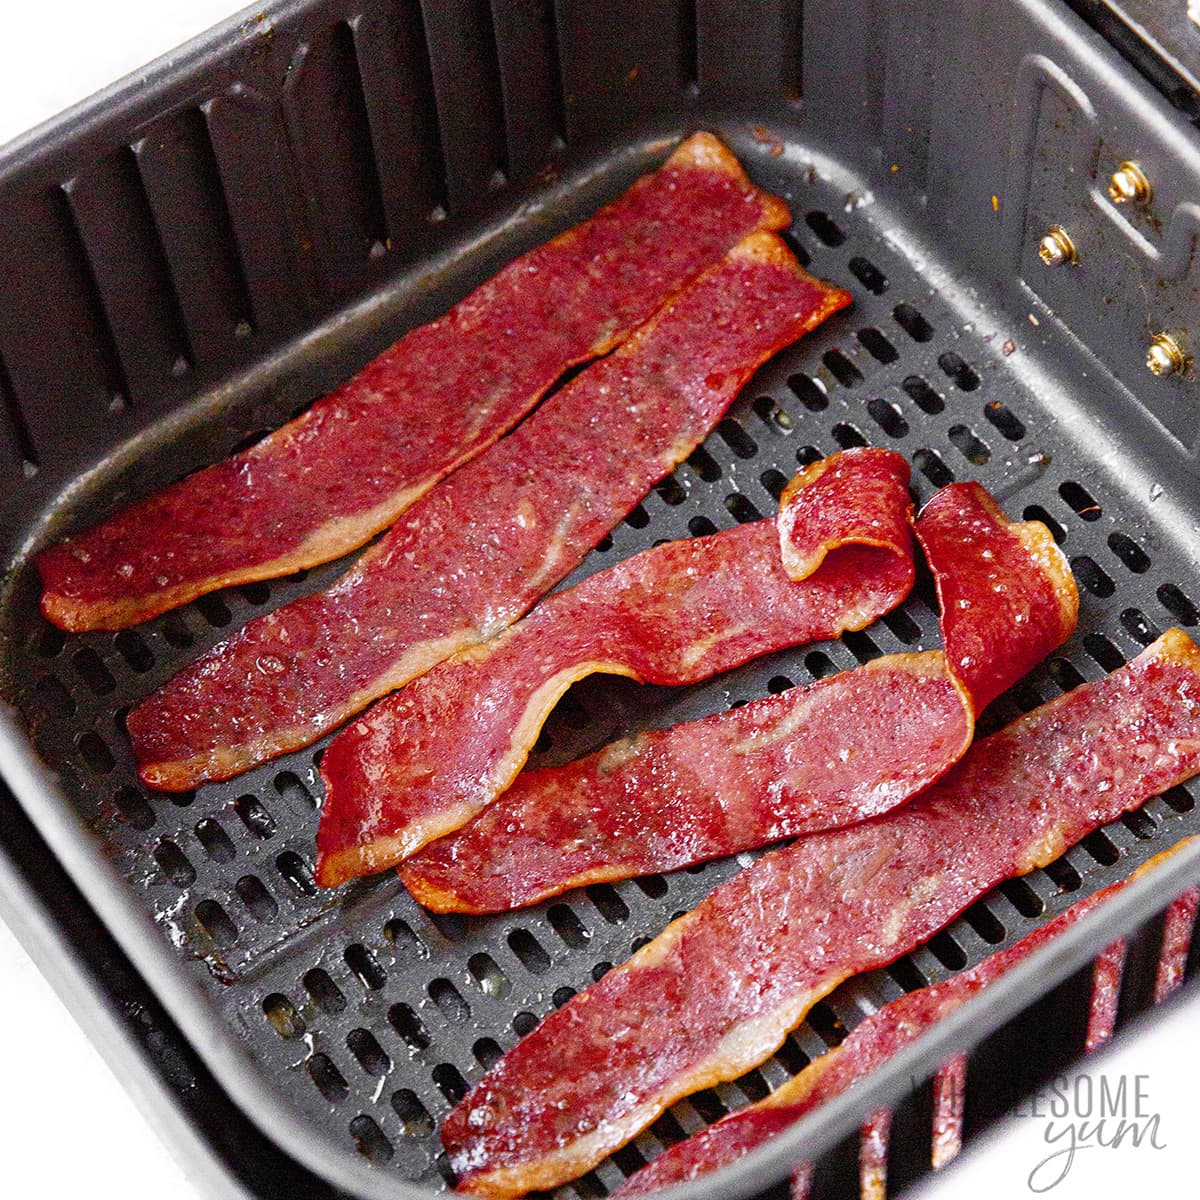 Cooked turkey bacon in air fryer basket.